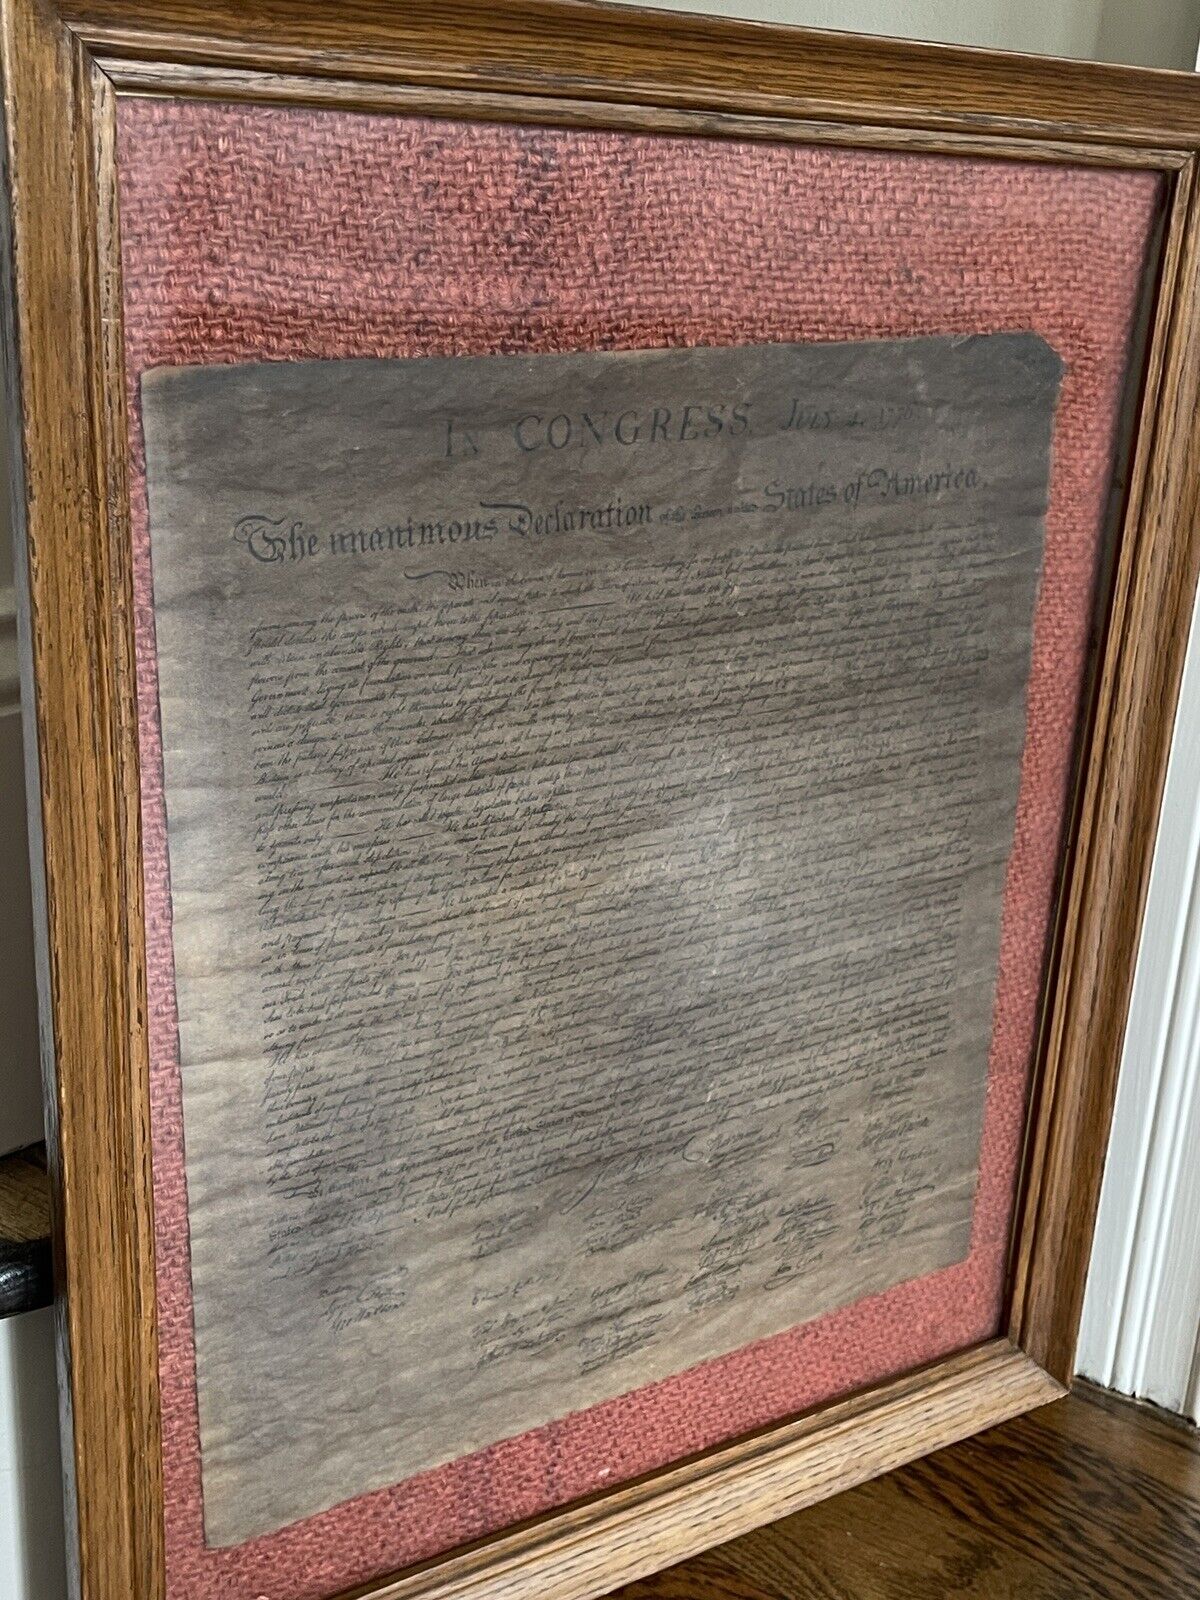 July 4, 1776 “Declaration Of Independence” ￼ Framed Already Not Authenticated. ￼